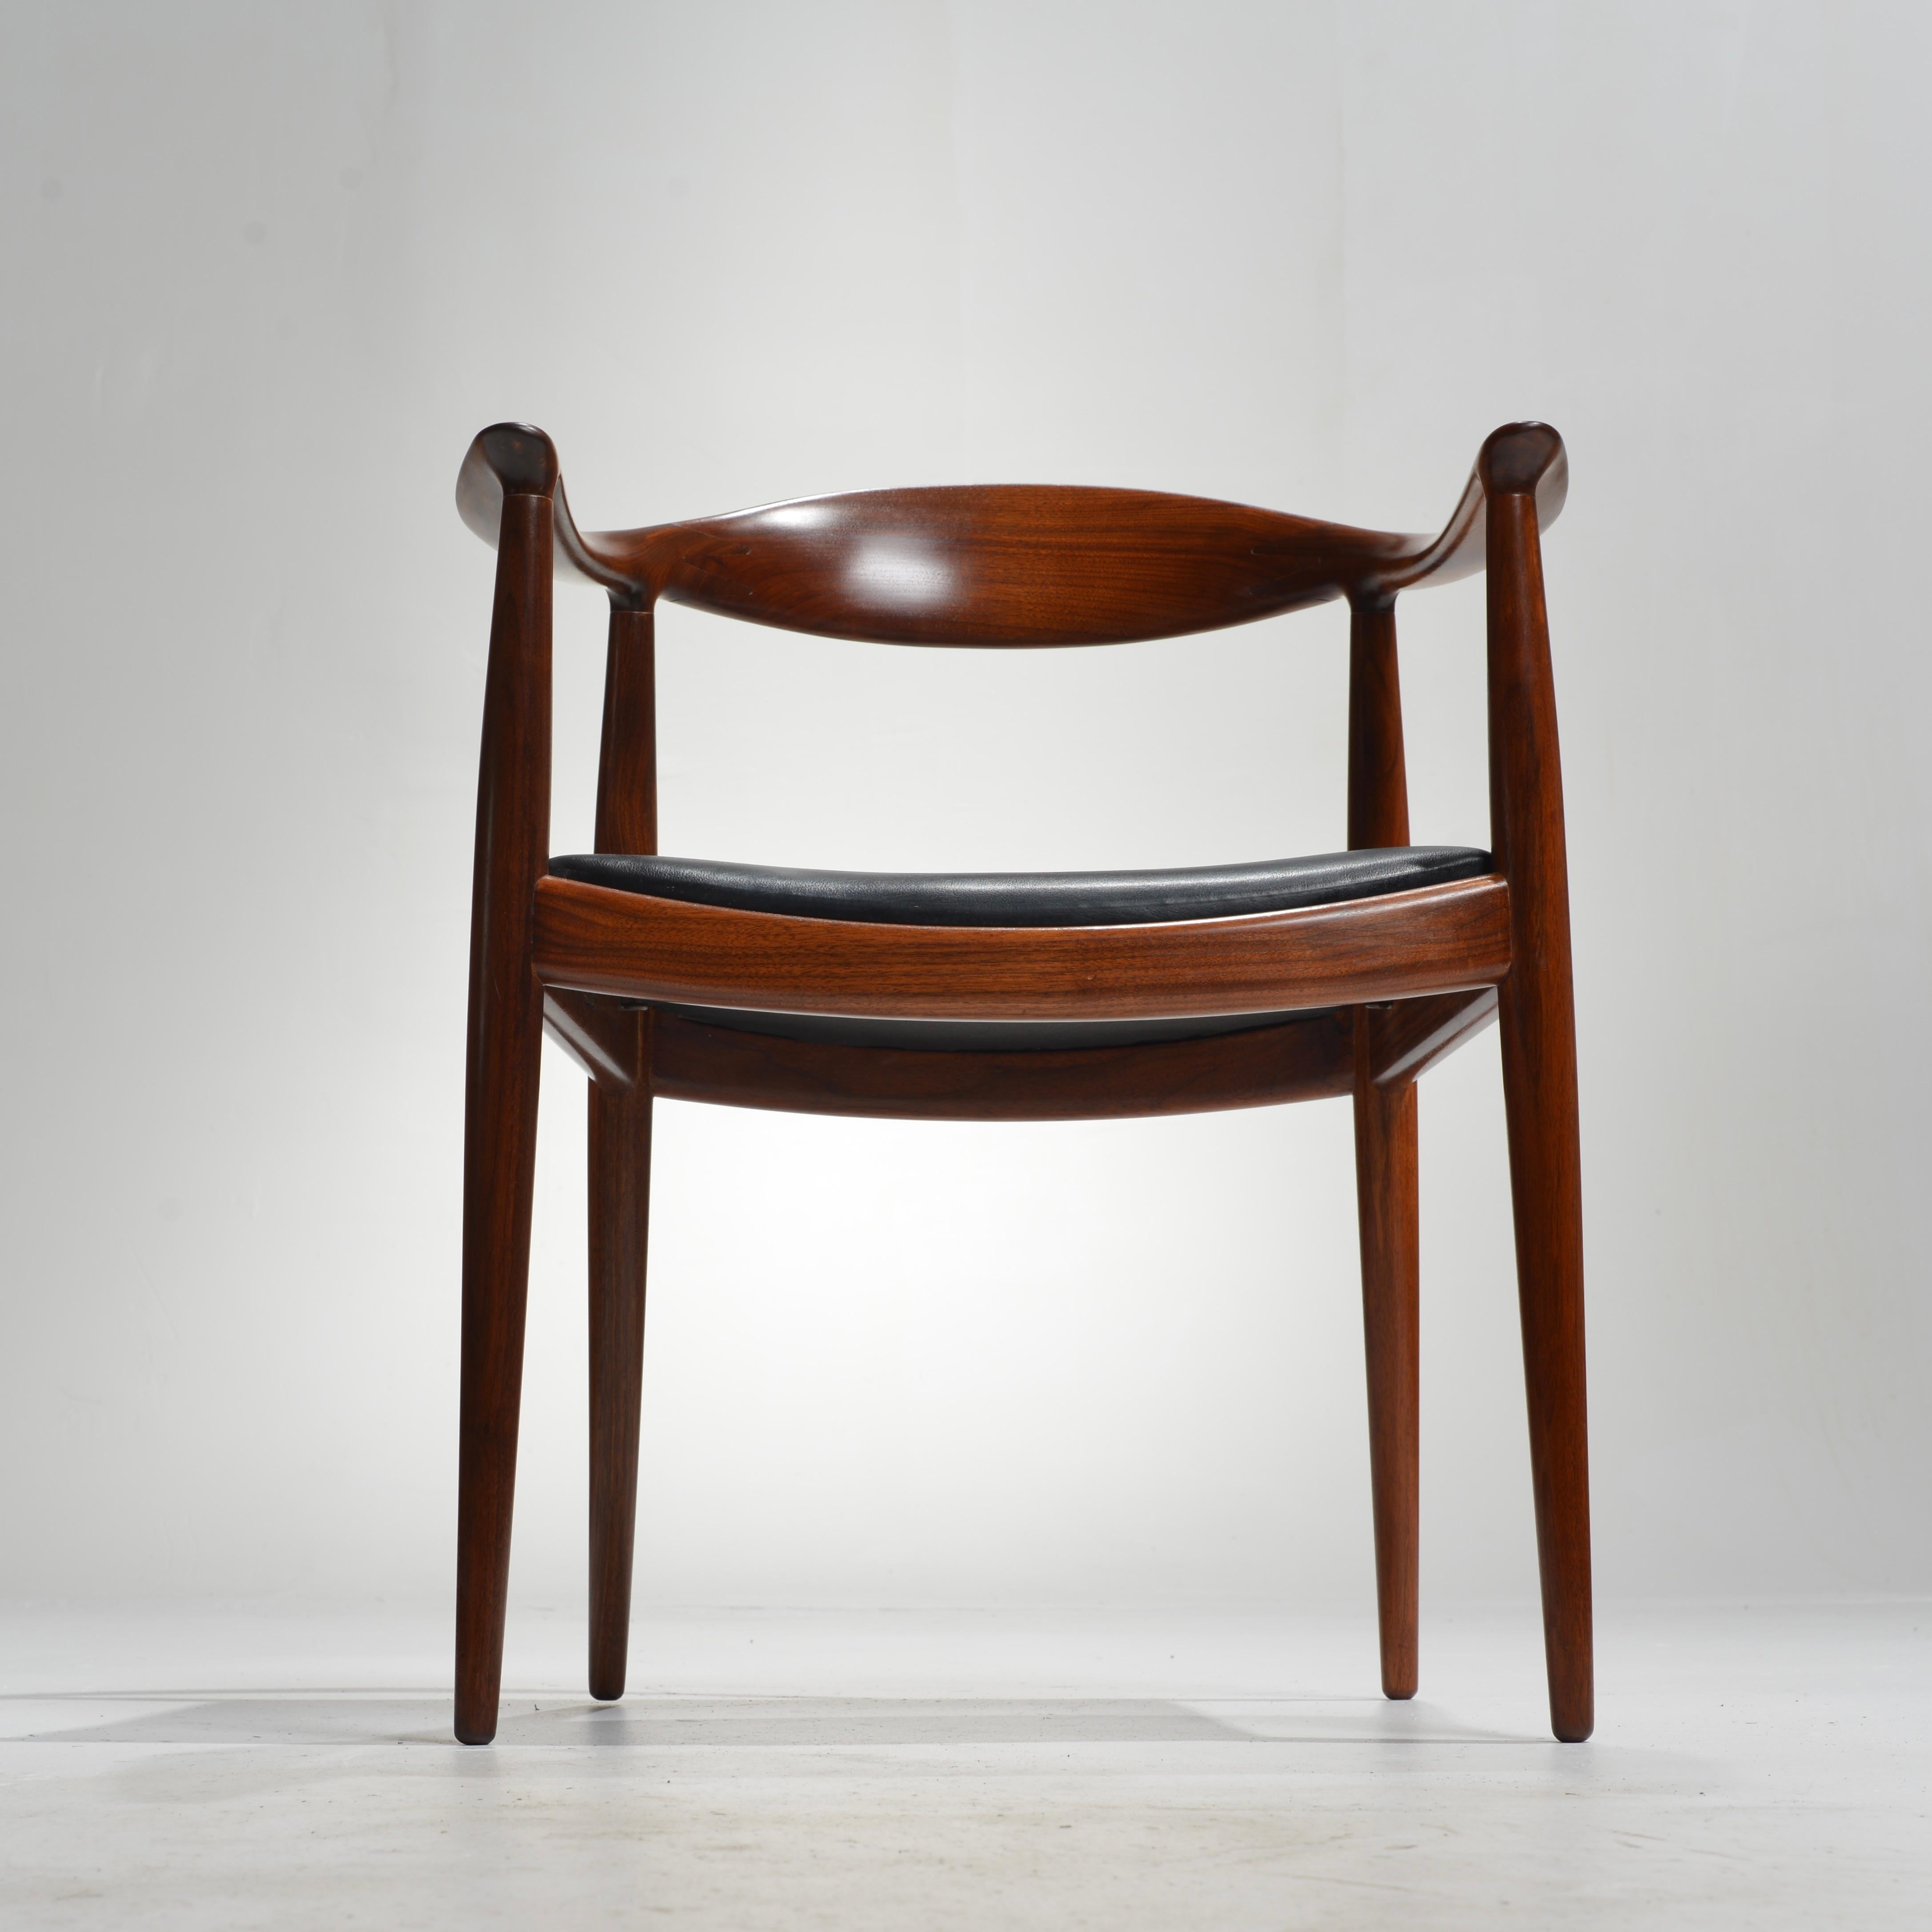  8 Hans Wegner for Johannes Hansen JH-503 Chairs in Walnut and Leather For Sale 1